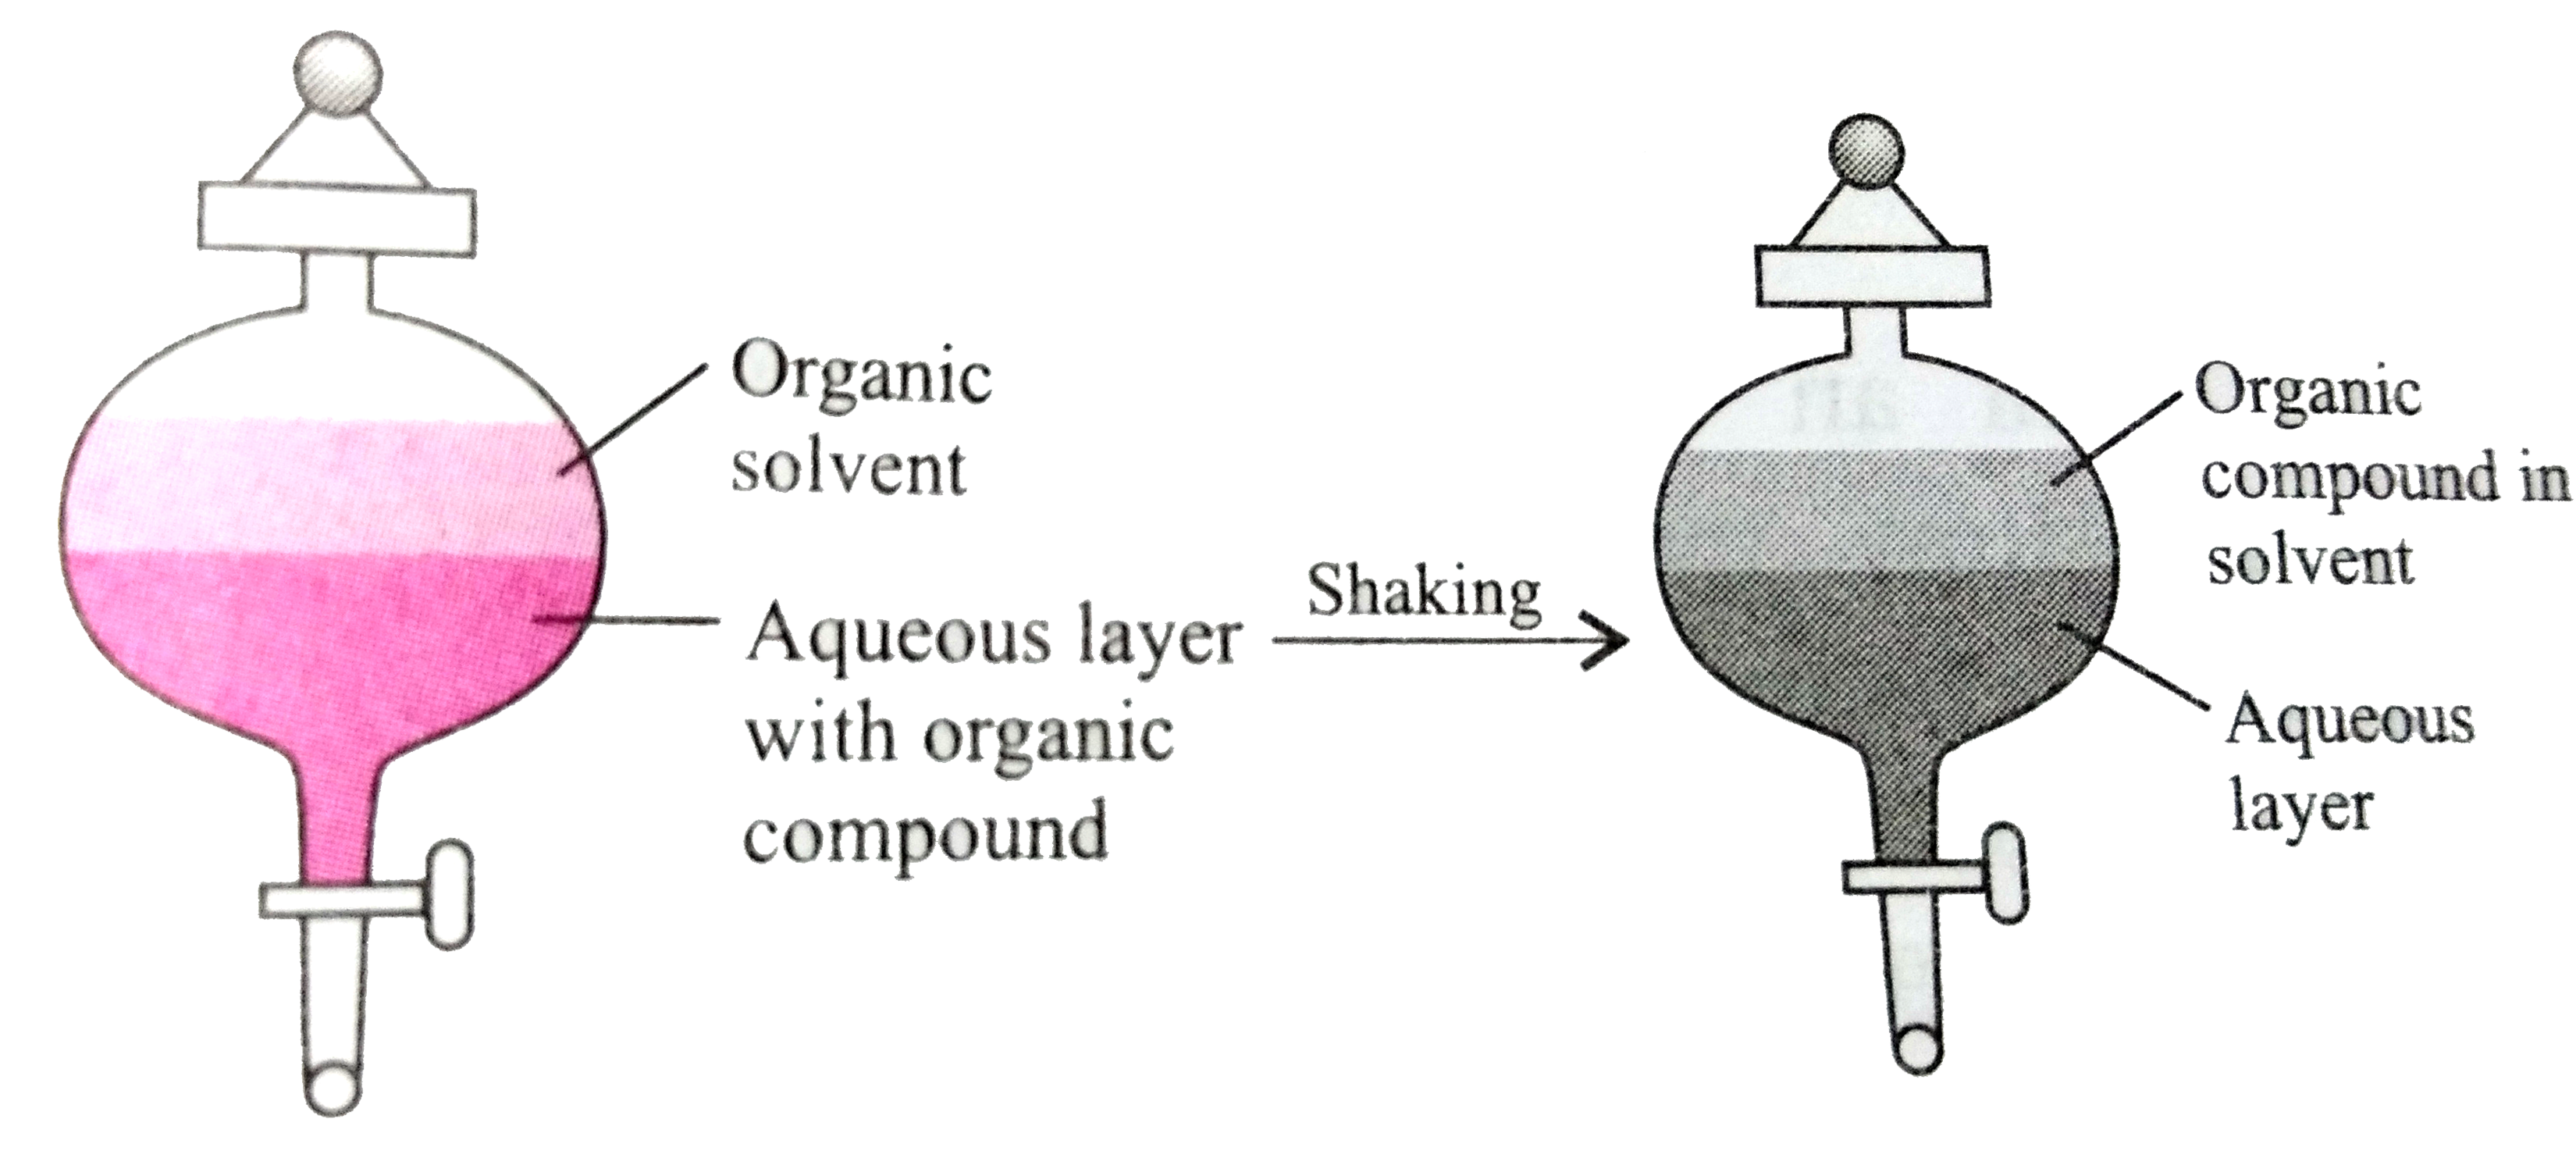 The process of separation of an organic compound from its aqueous solution by shaking with a suitable solvent in termed solvent extraction or differential extraction.      The organic compound present in the aqueous layer moves to the organic solvent because